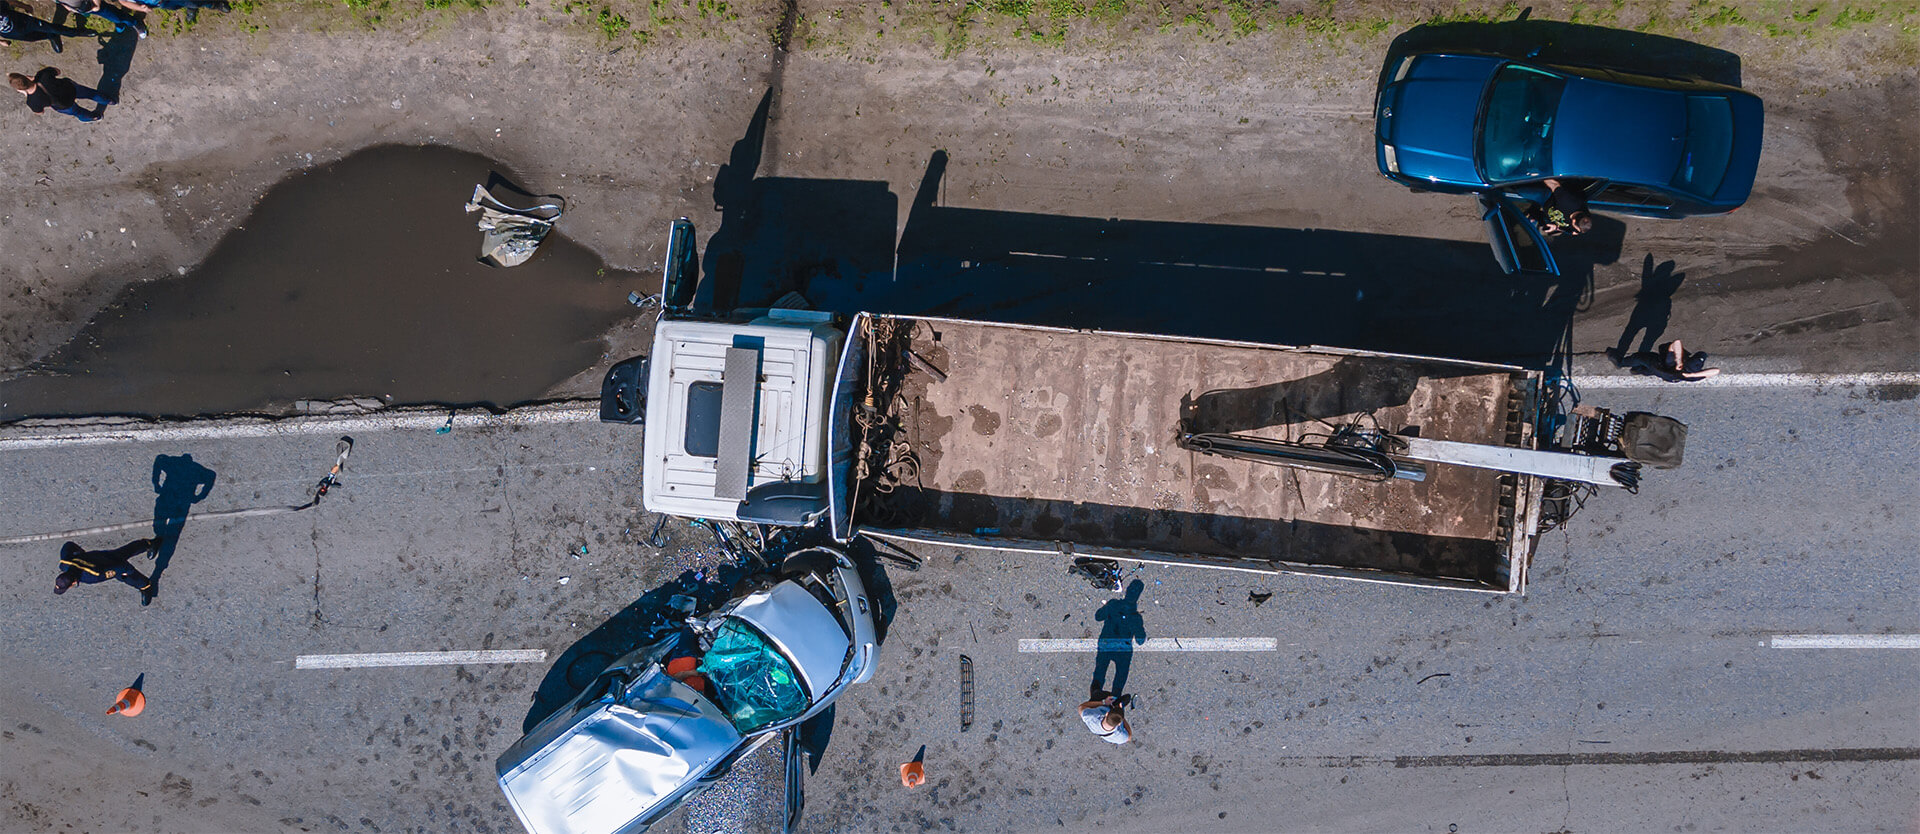 aerial view of a car crashing into a truck